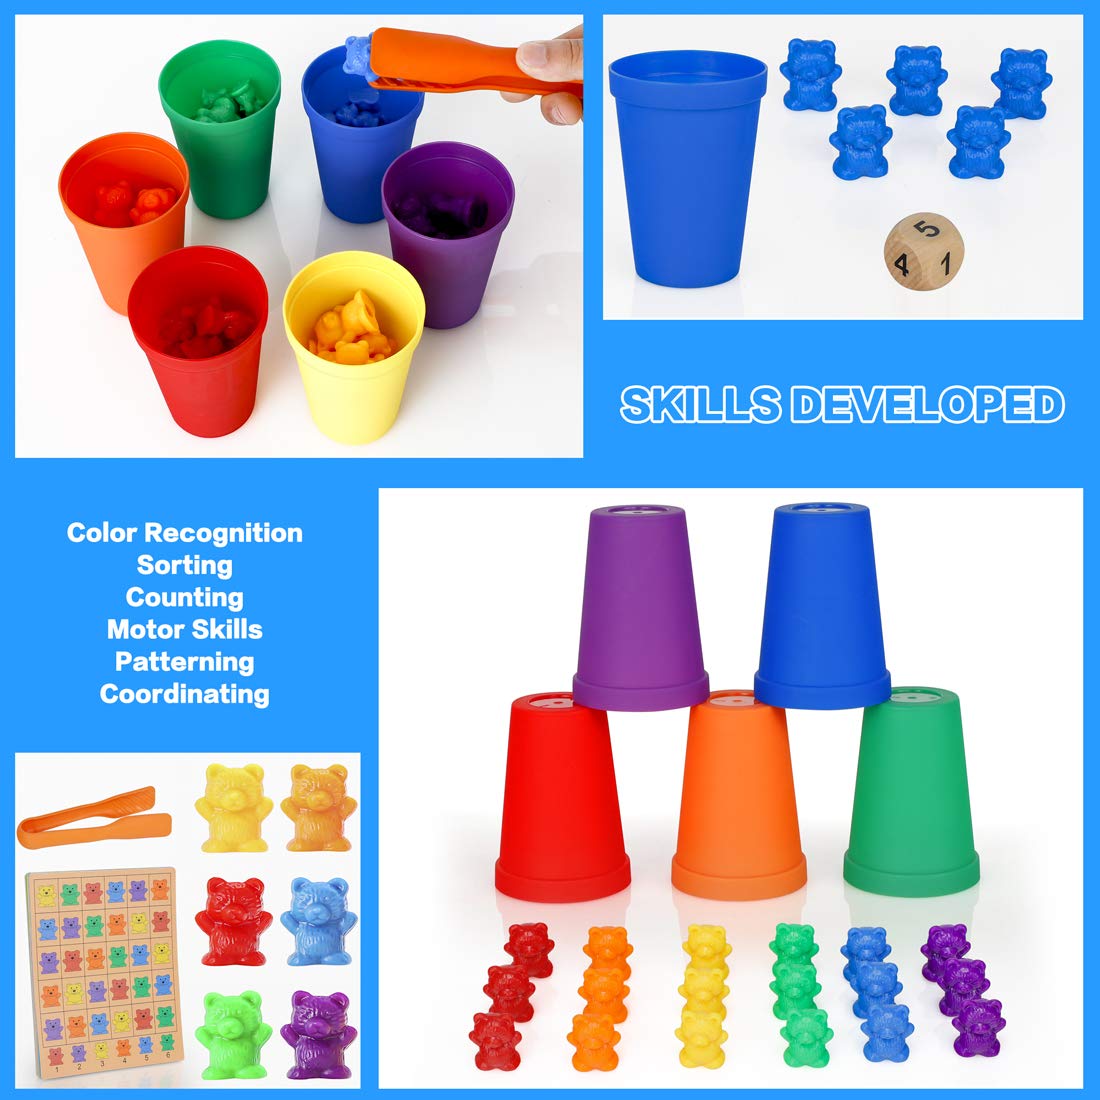 NEOROD Rainbow Counting Bears with Matching Sorting Cups, Number Color Recognition STEM Educational Toddler Preschool Math Manipulatives Toy Set of 90, 2 Tweezers, 2 Dices, 12 Cards, Container